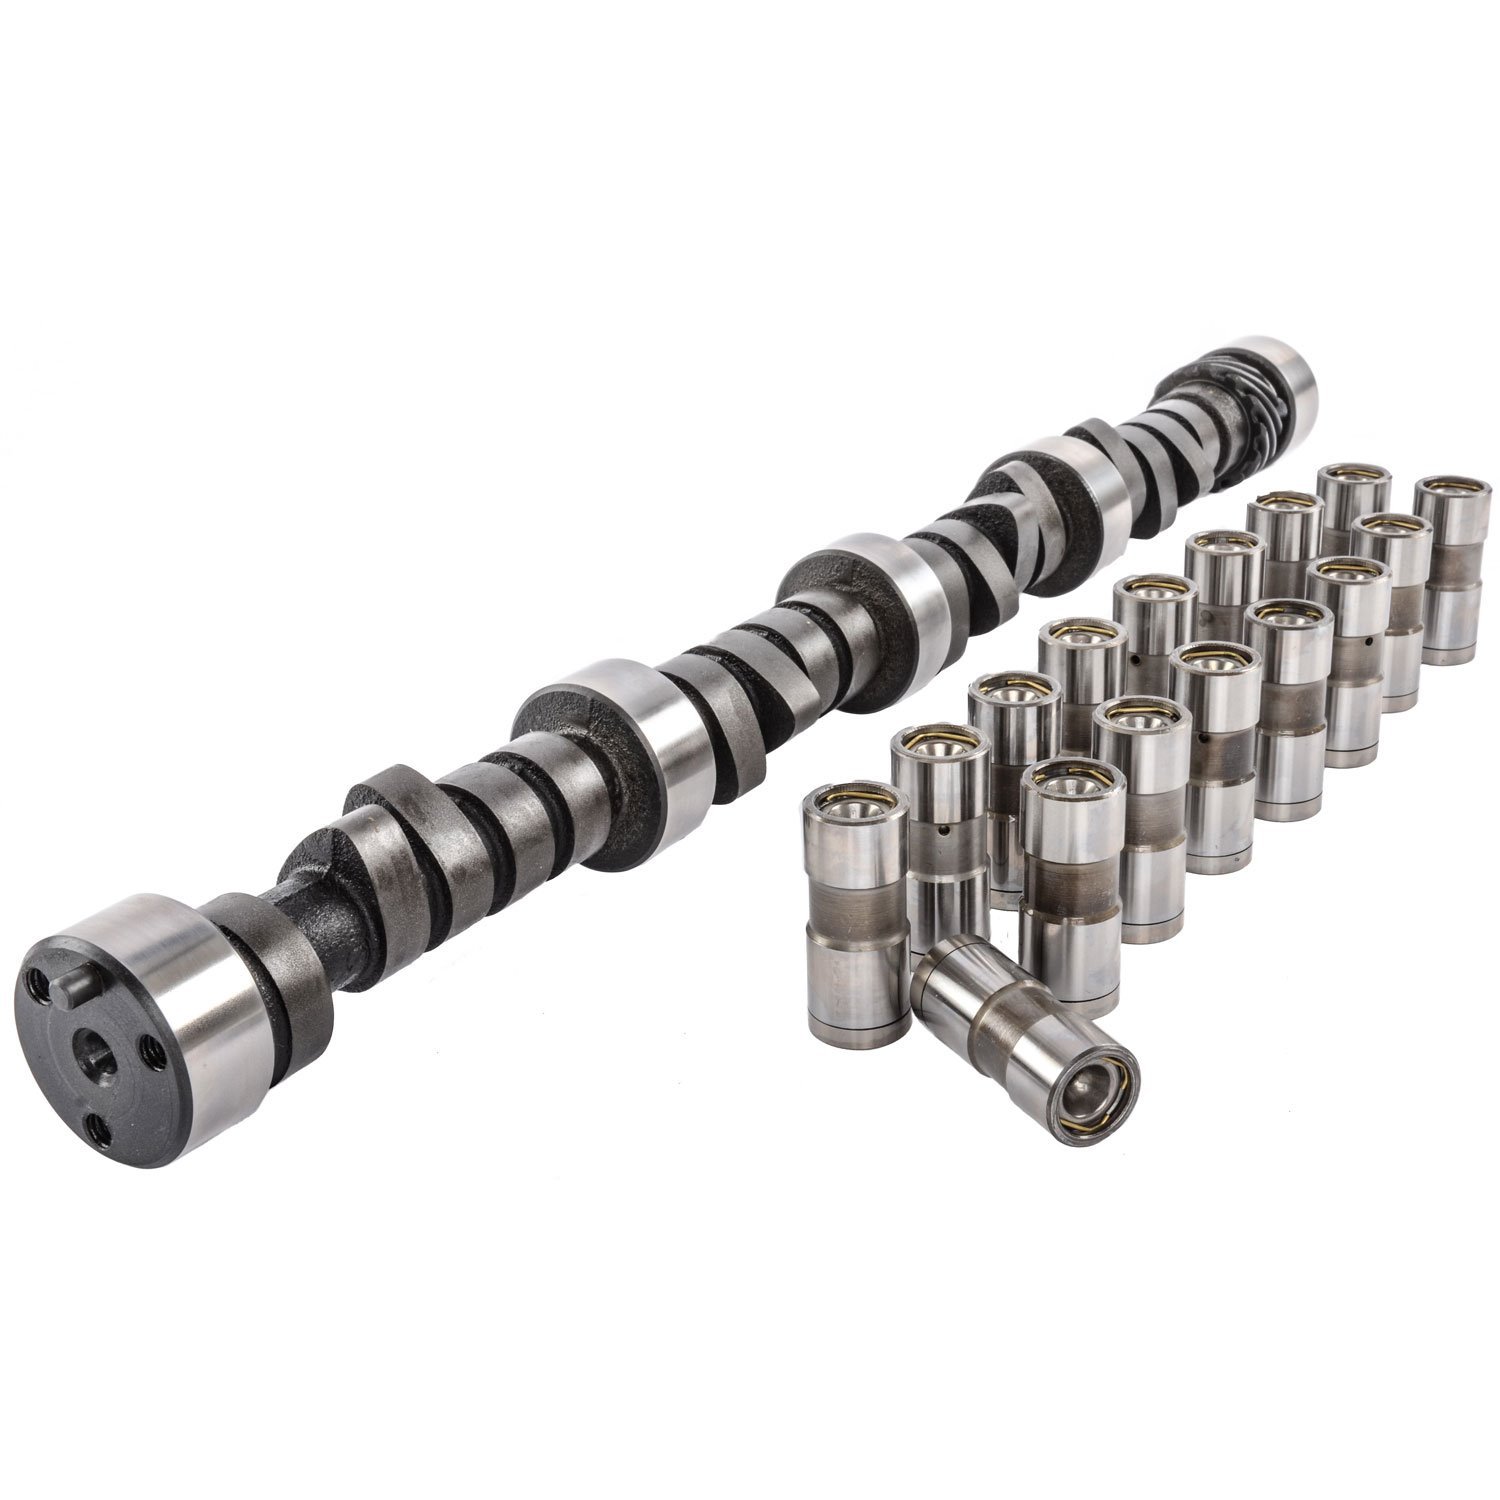 Hydraulic Flat Tappet Camshaft & Lifters for 1957-1985 Chevy 262-400